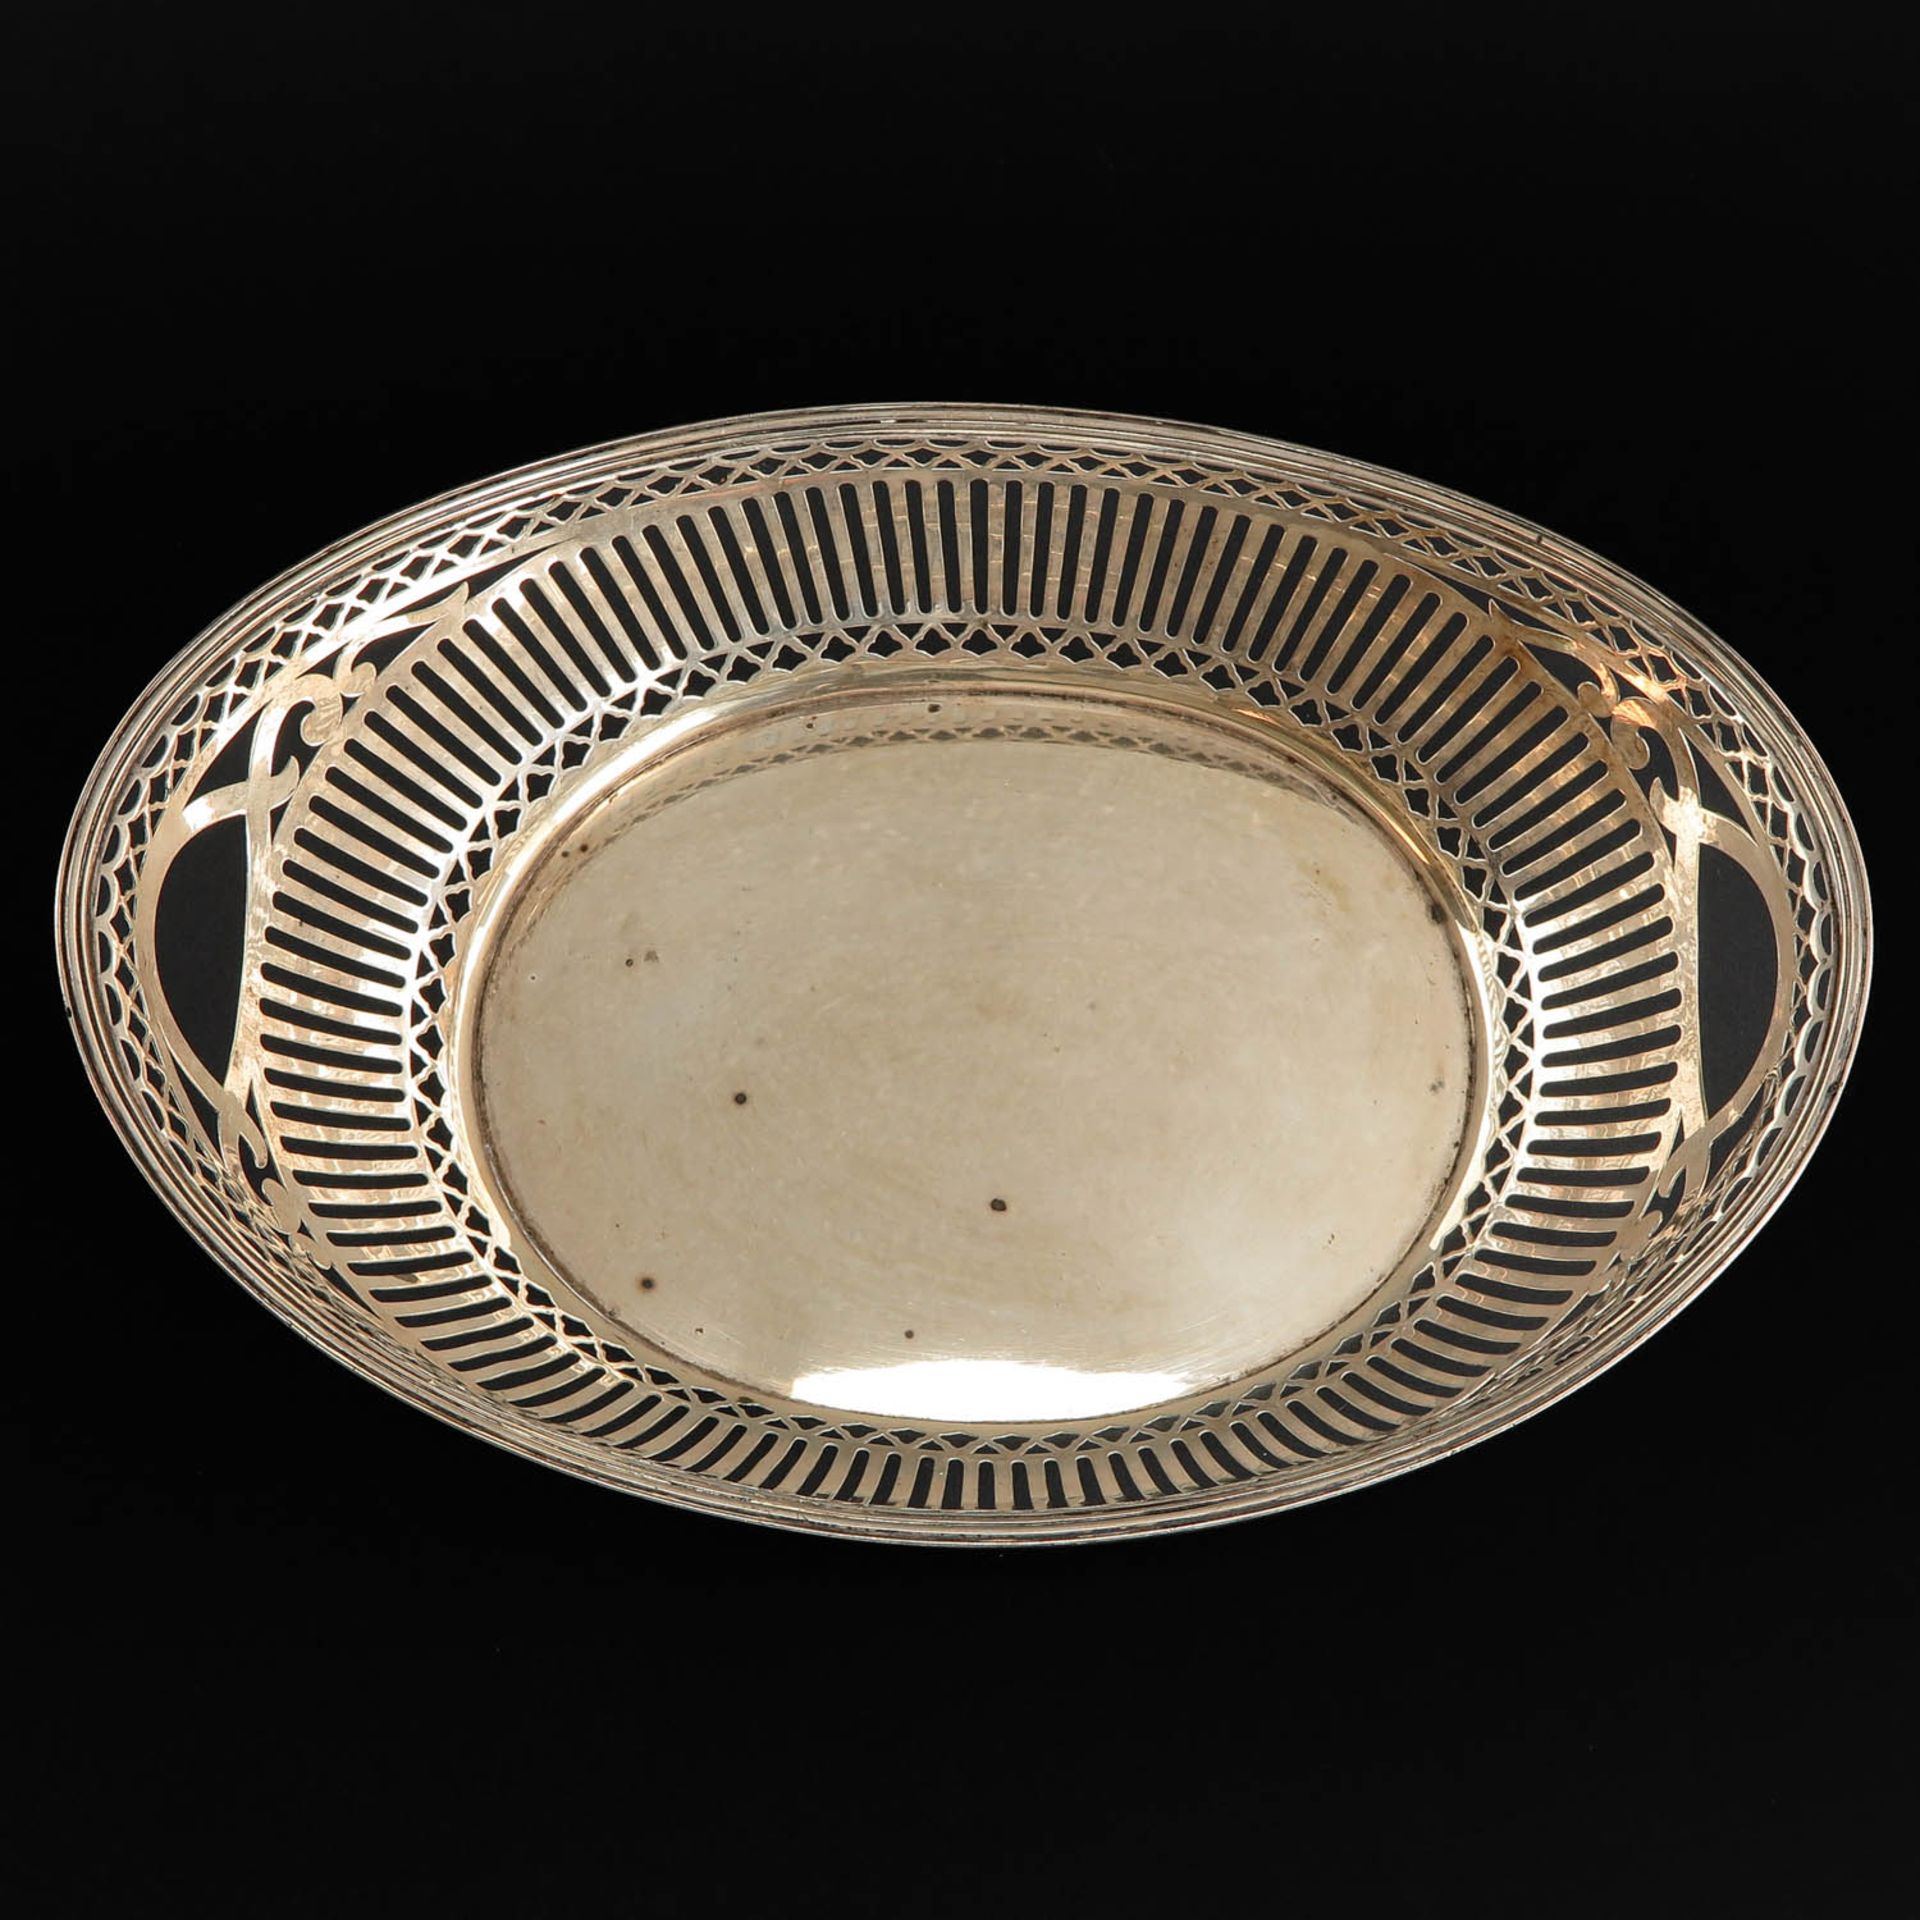 A Silver Bread Basket - Image 5 of 8